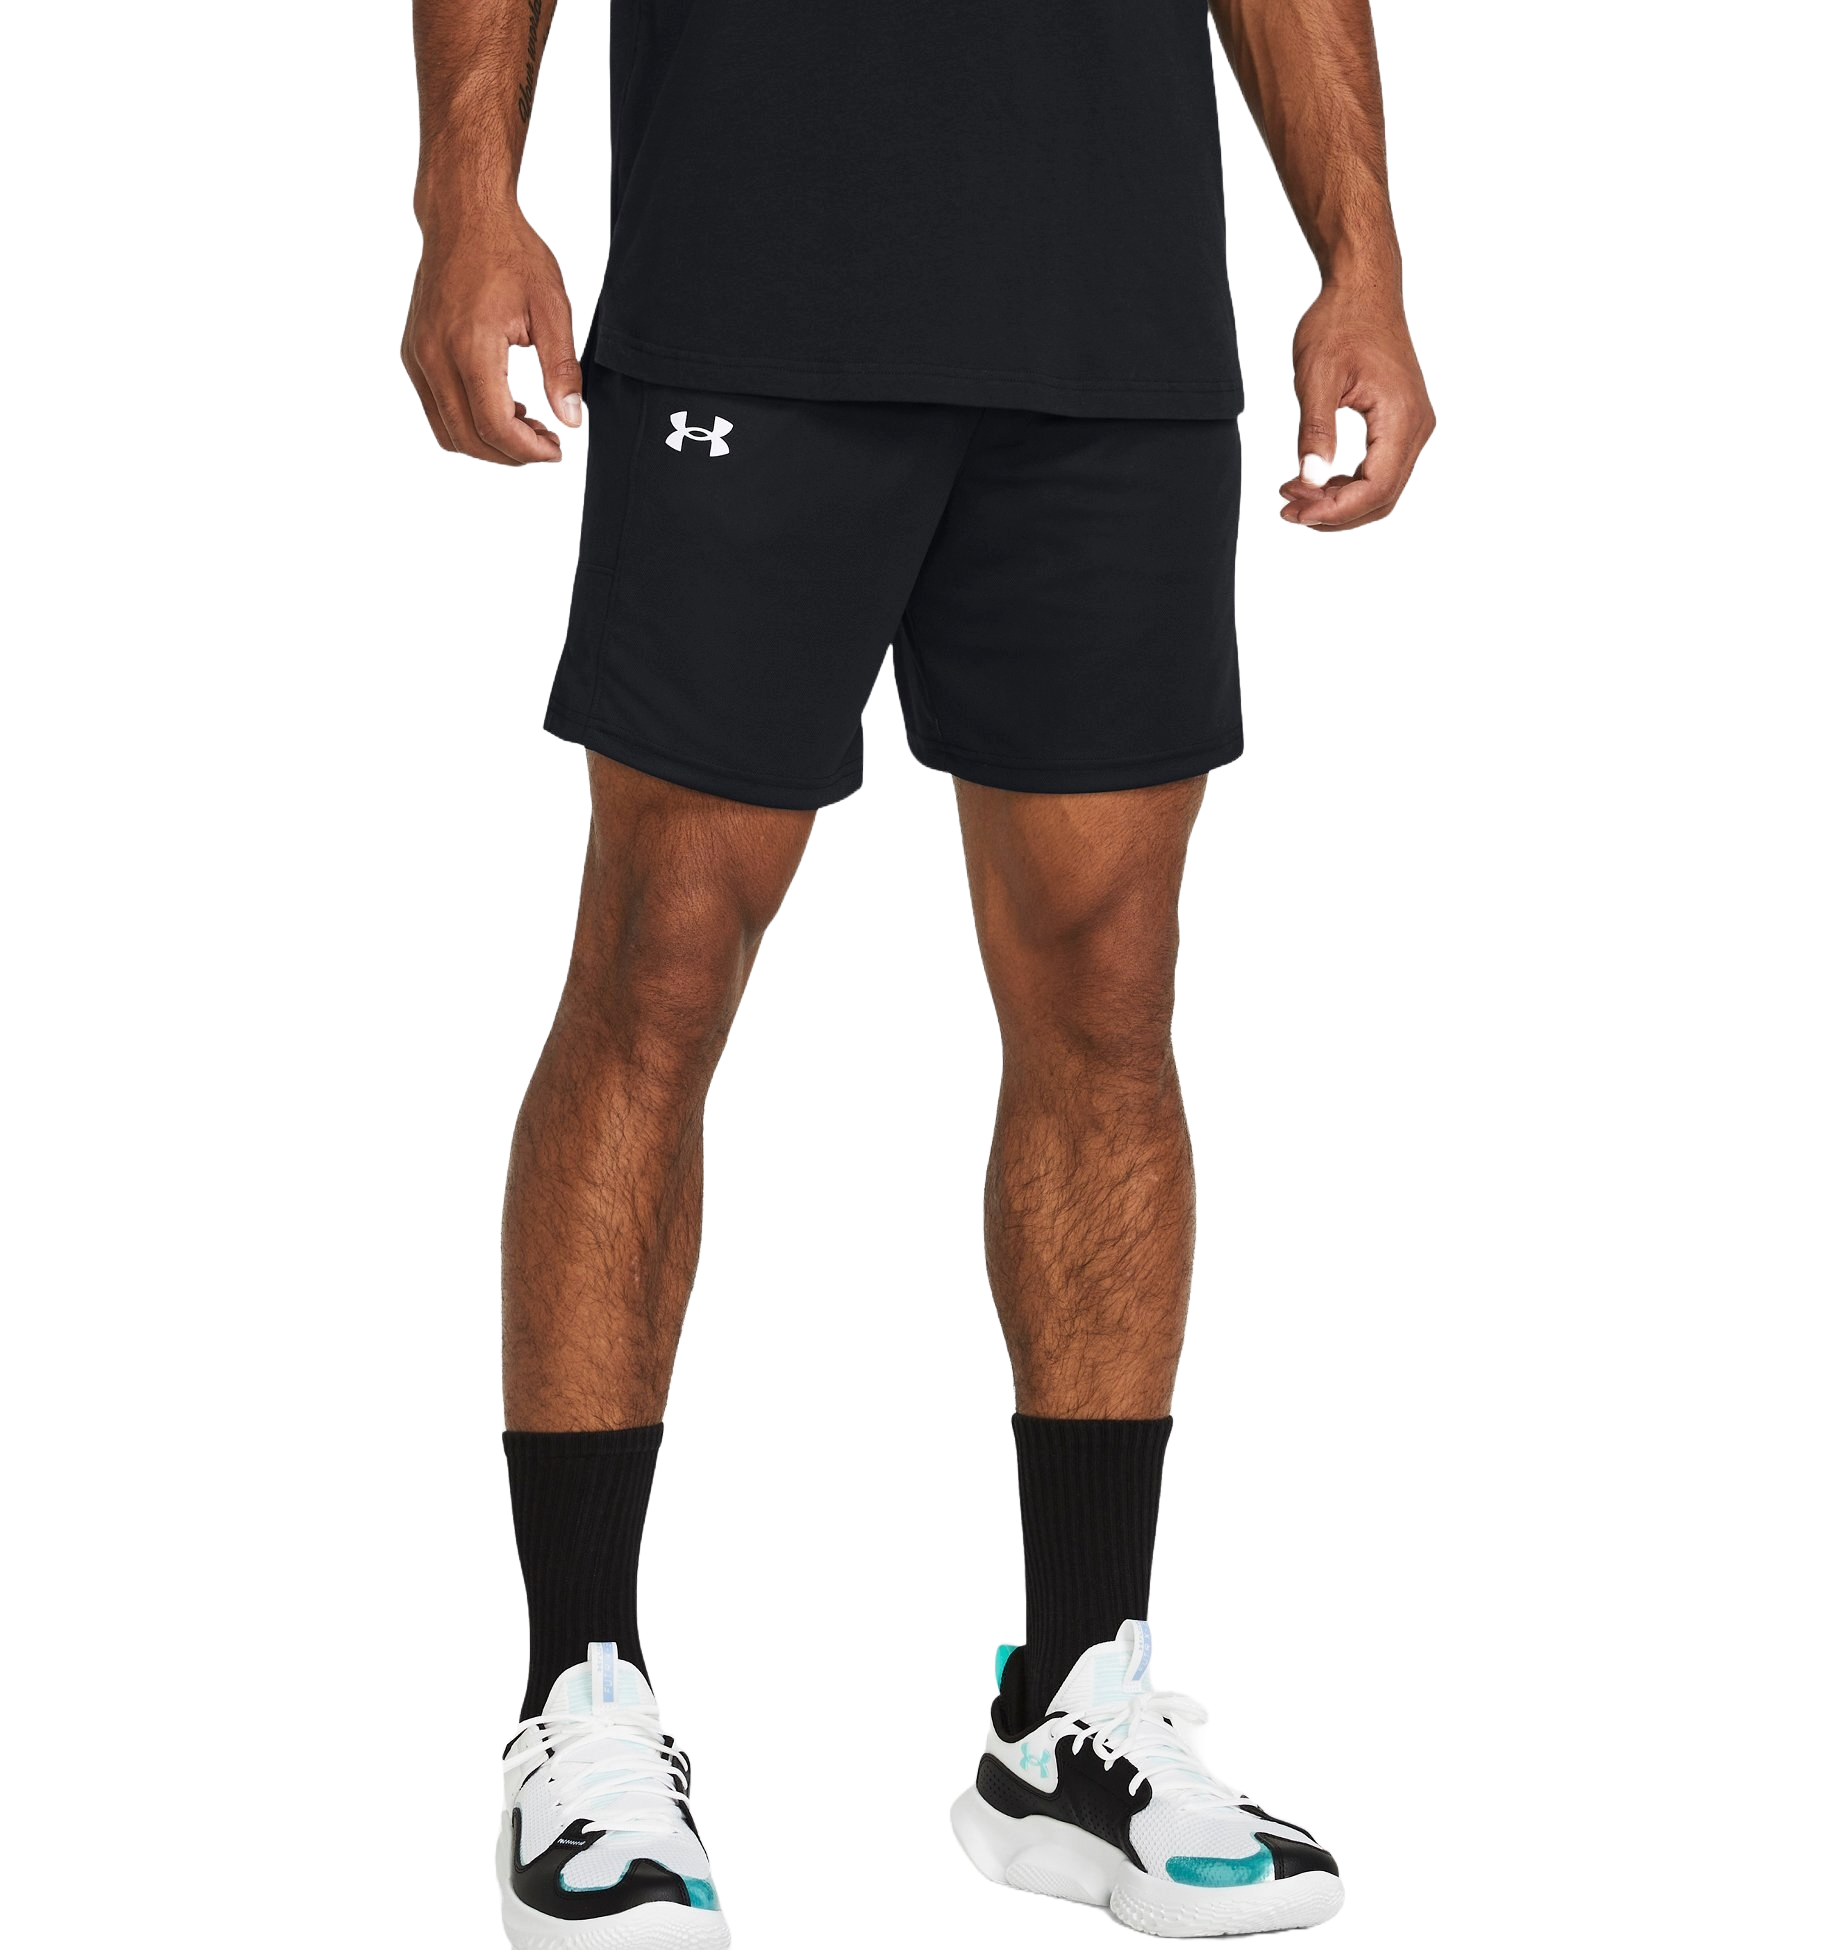 Under Armour Zone 7" Shorts - Mens